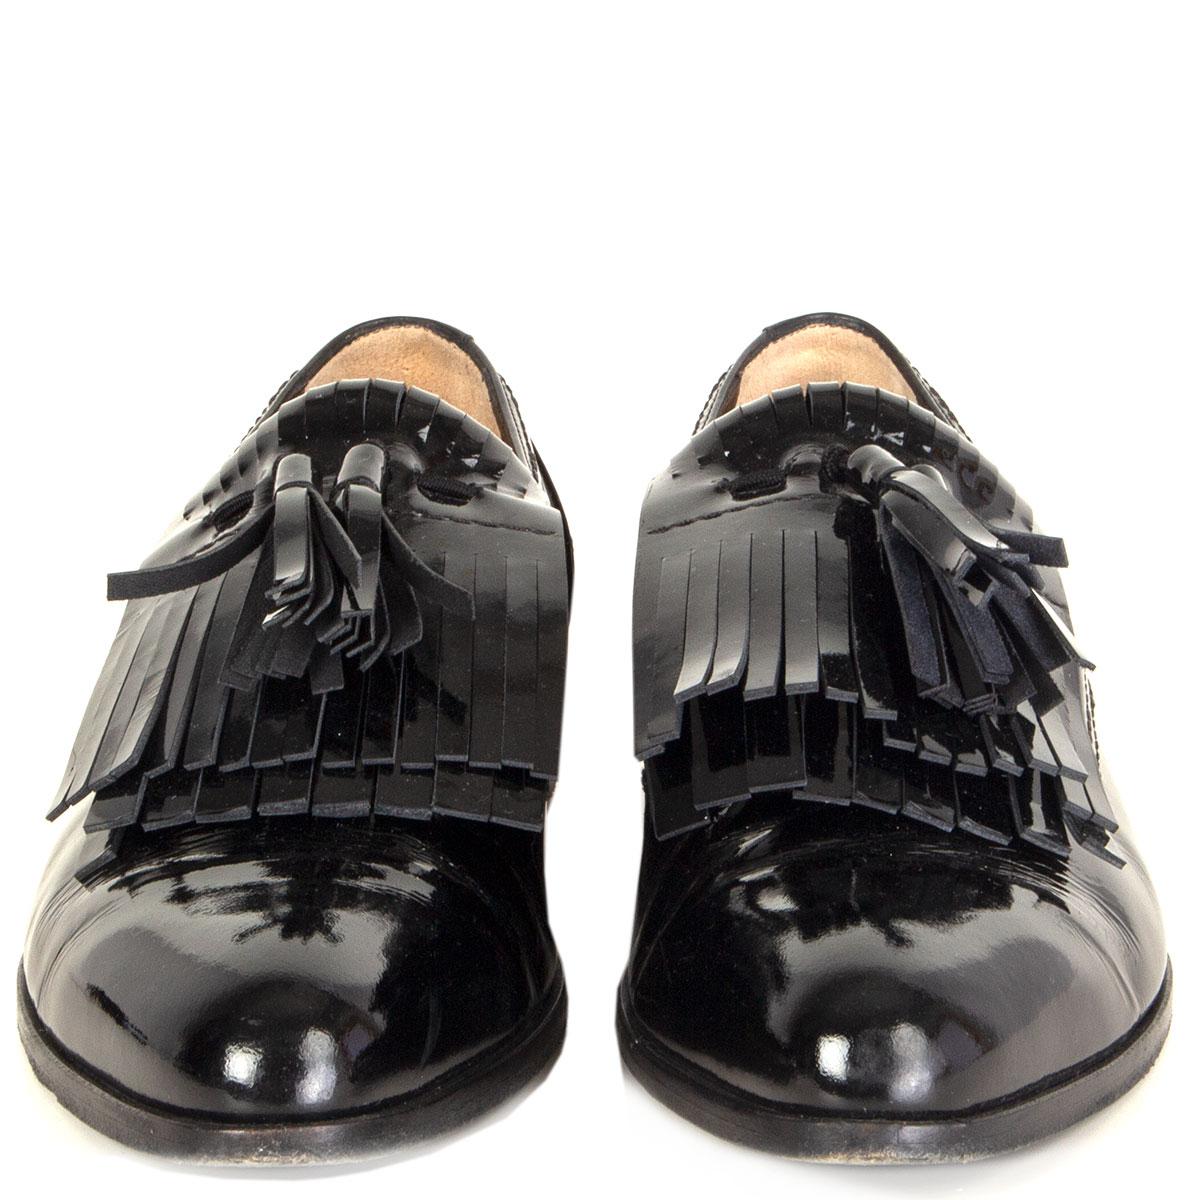 100% authentic  Lanvin 'Boyish' tassel loafers in black patent leather. Have been worn with some visible creased parts at the front. Overall in good condition.  

Measurements
Imprinted Size	38
Shoe Size	38
Inside Sole	25cm (9.8in)
Width	7.5cm